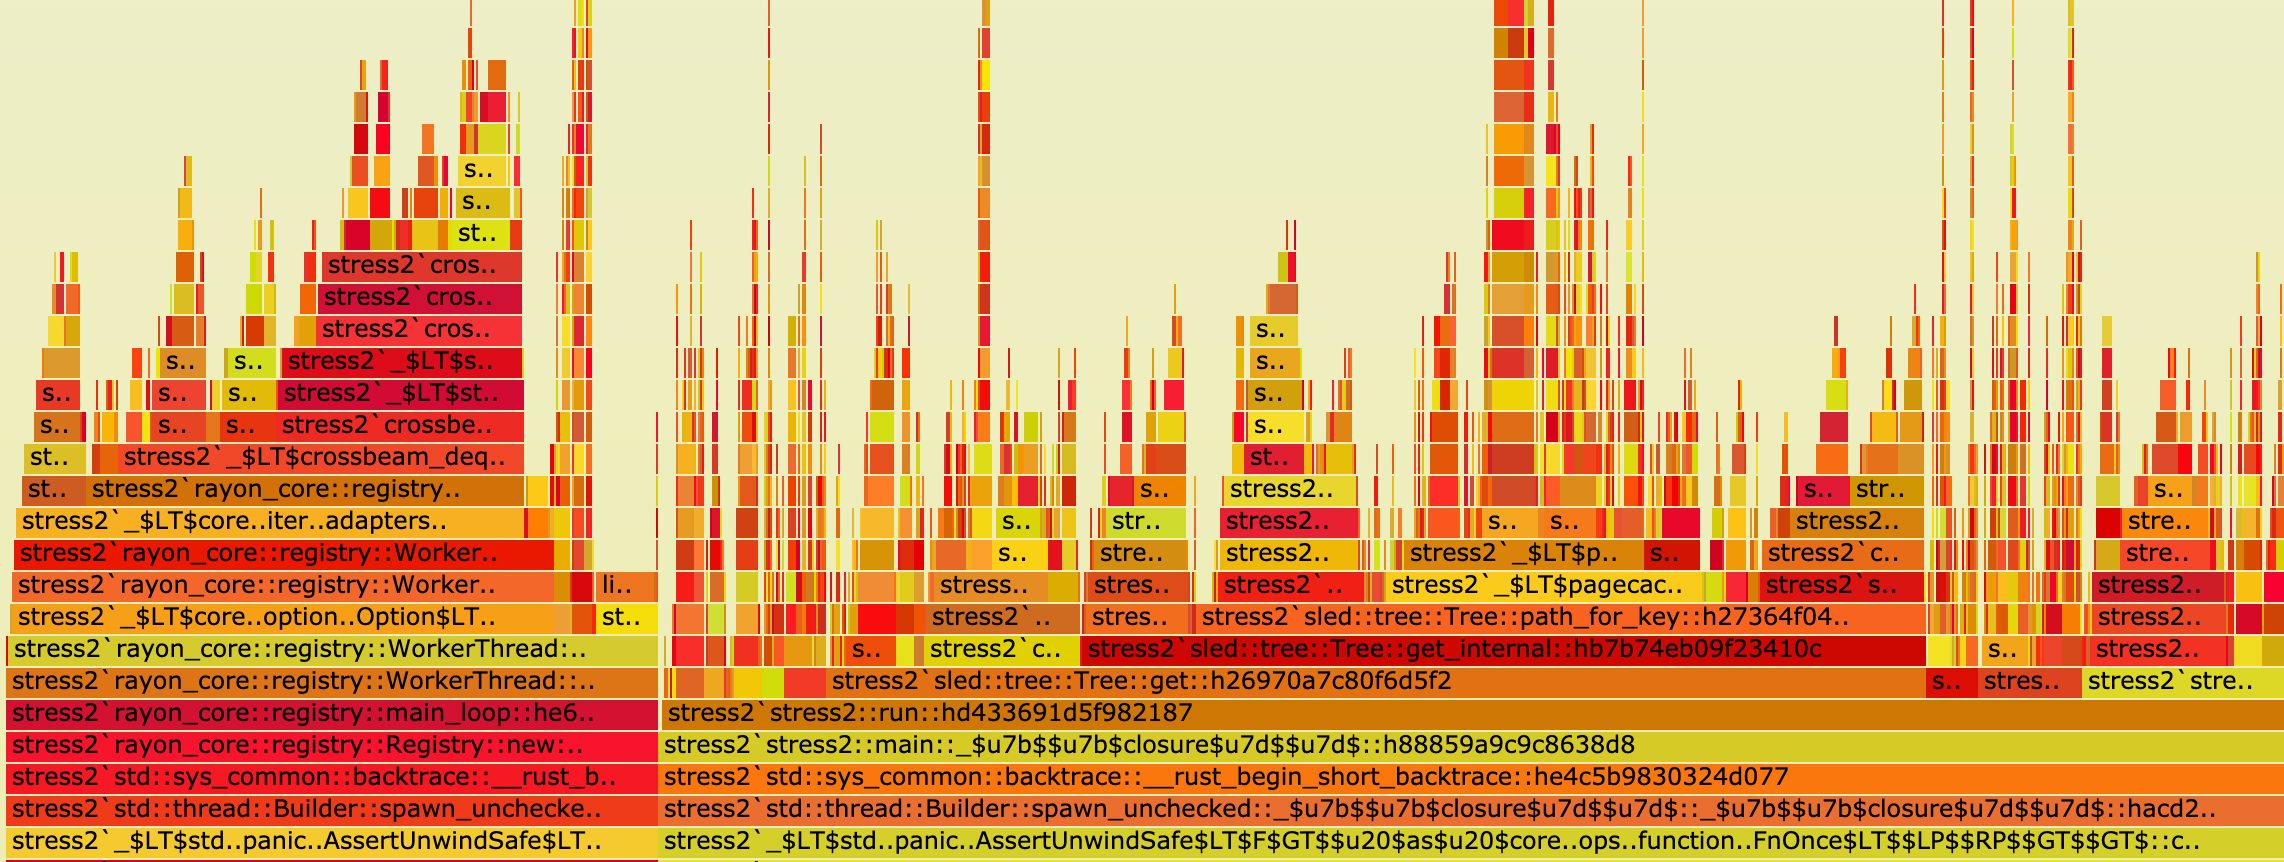 flamegraph example